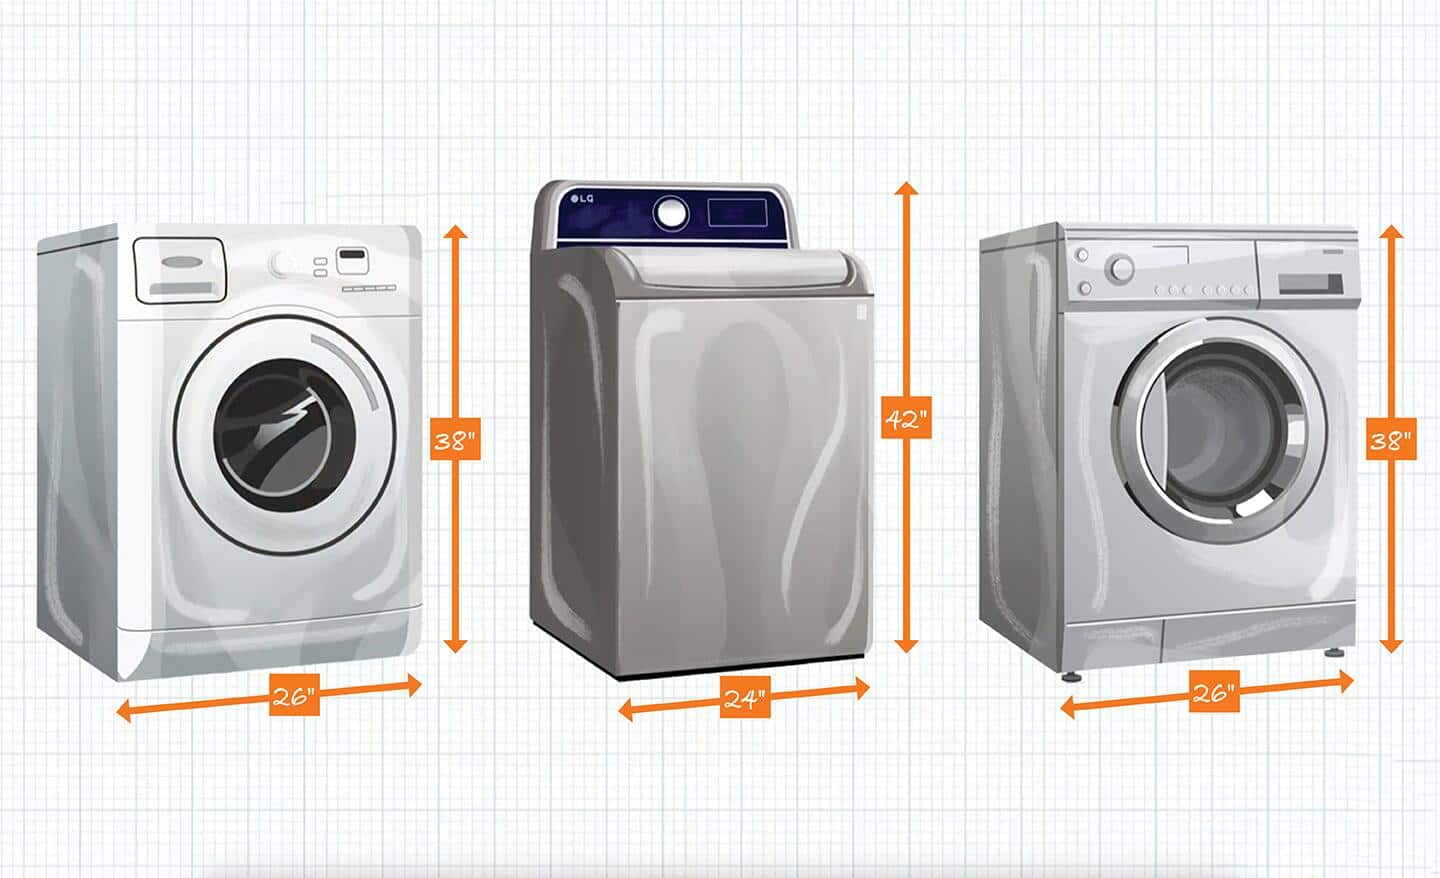 Washing Machine Dimensions Make Sure You Know The Proportions Before Buying